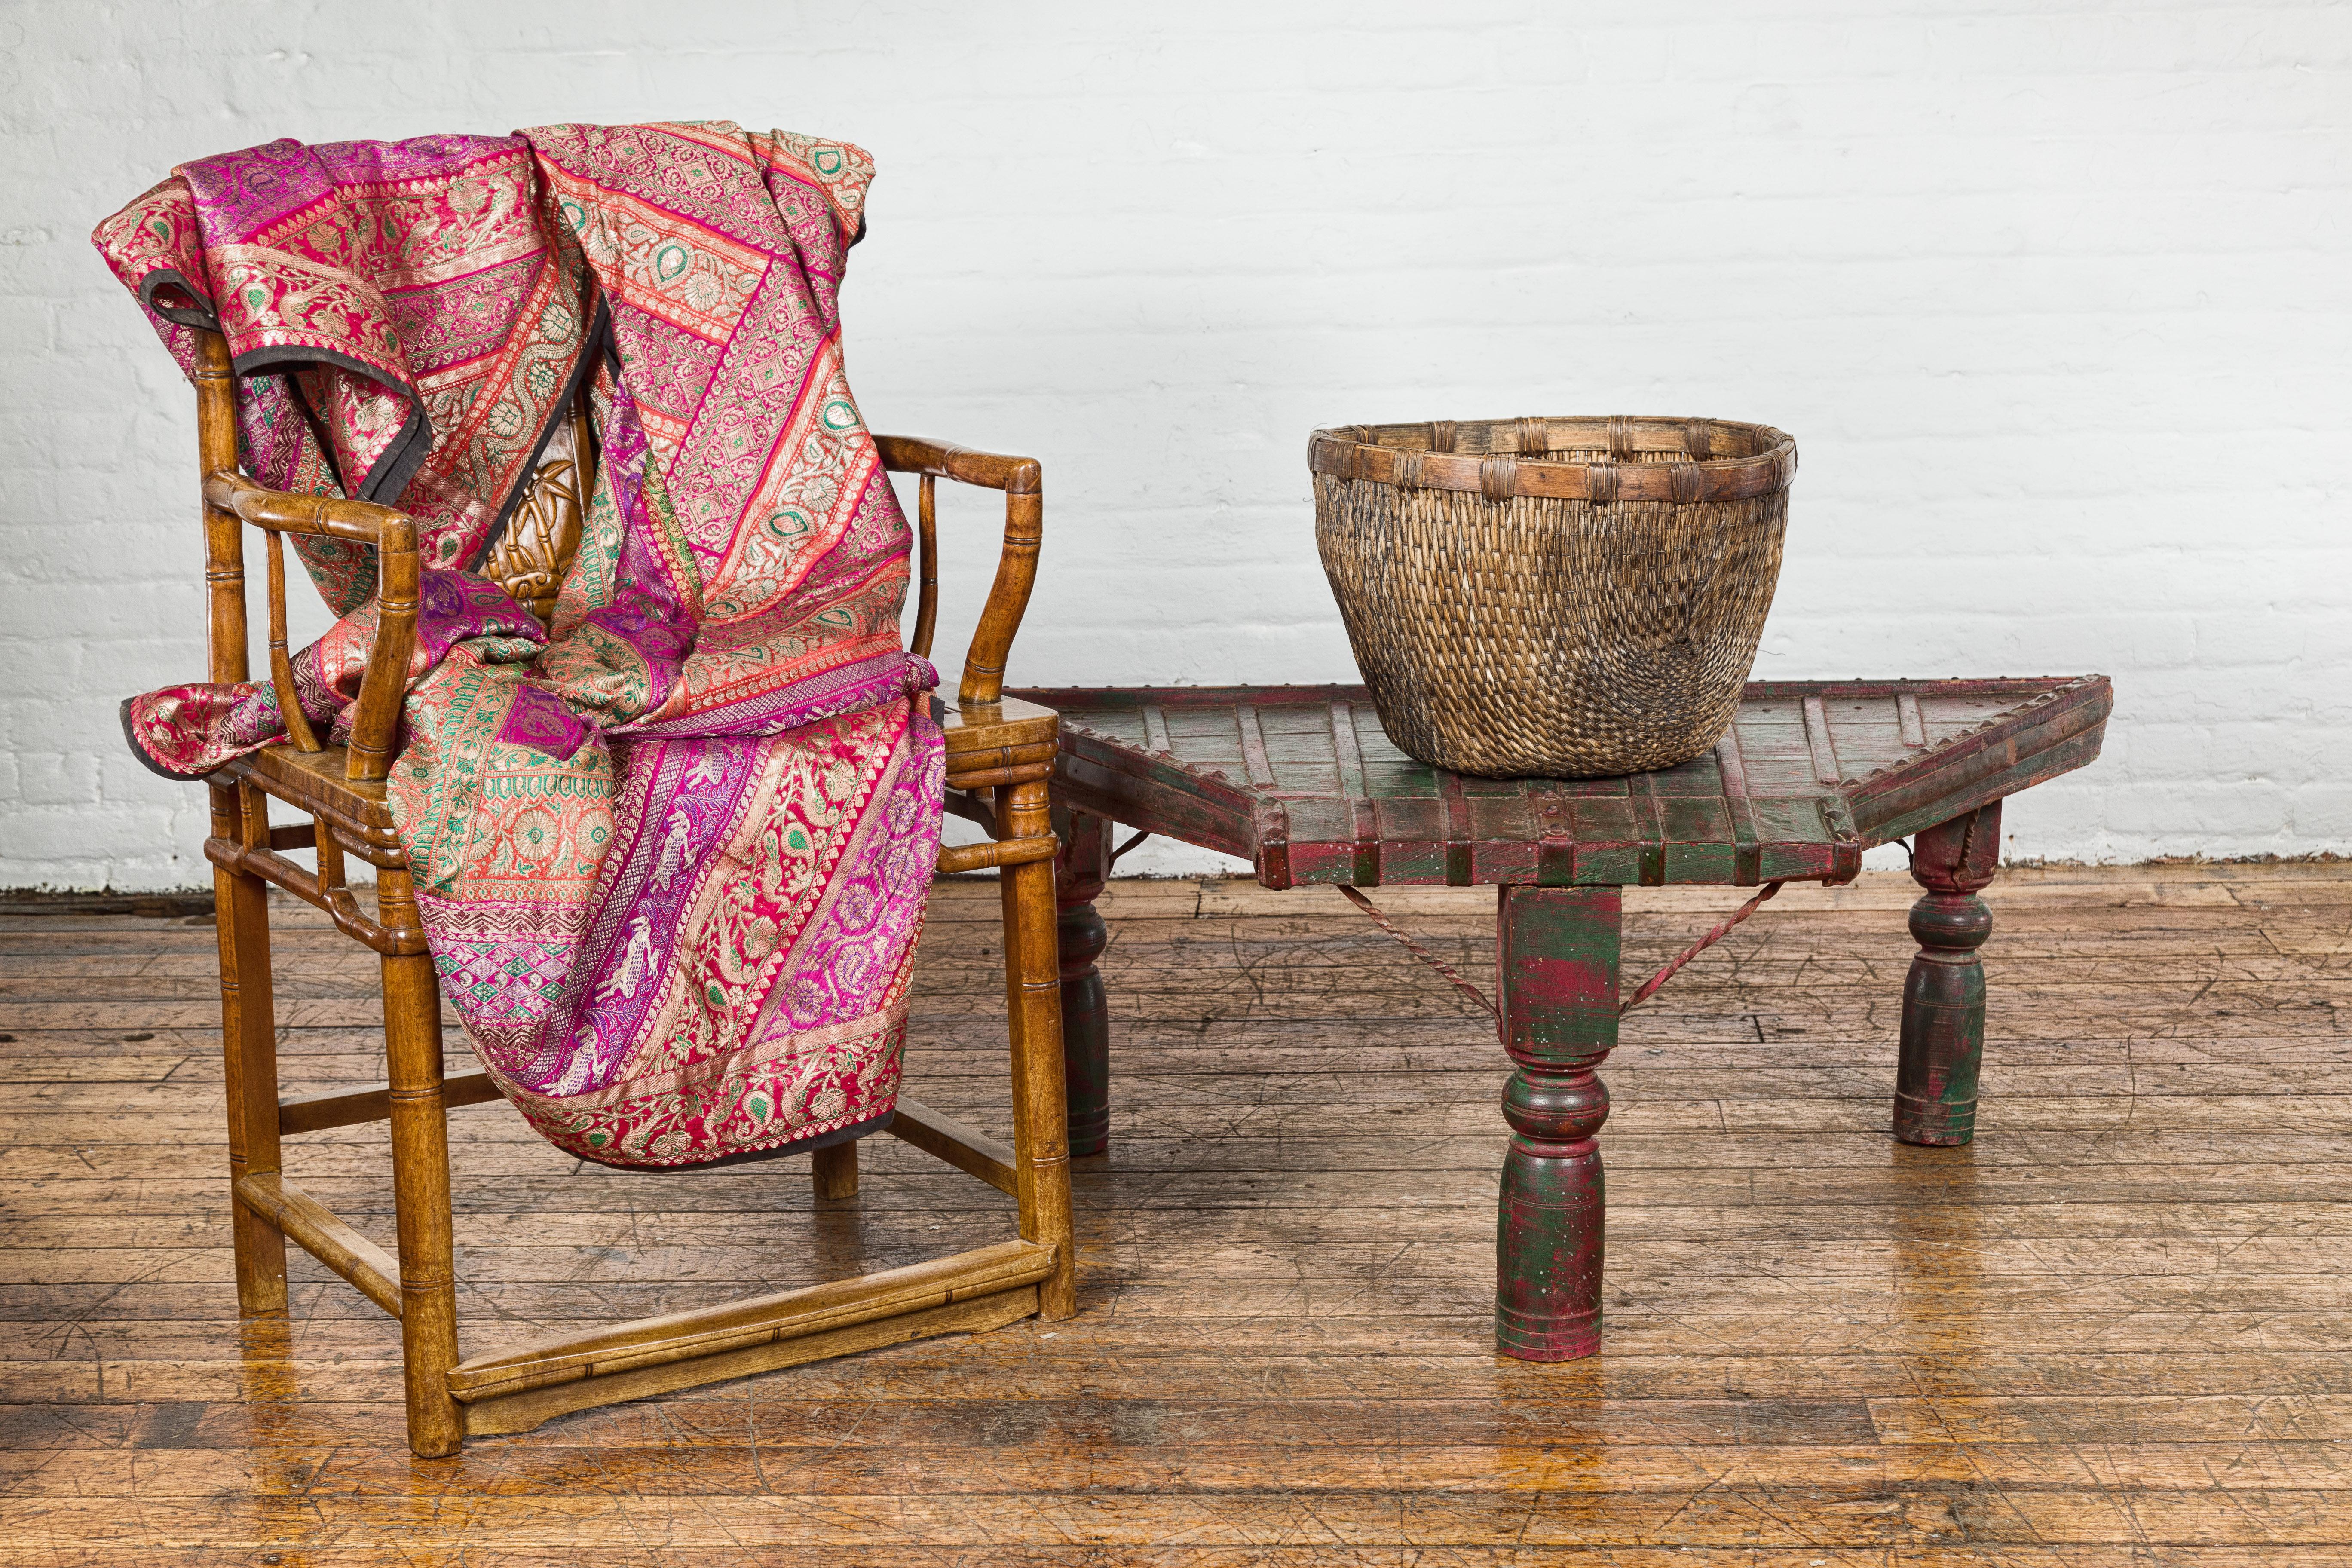 An antique rustic green and red painted coffee table crafted from a repurposed bullock cart from the 19th century with trapezoidal top, protruding front,  diamond shaped studs, twisted iron stretchers, turned baluster legs and nicely weathered